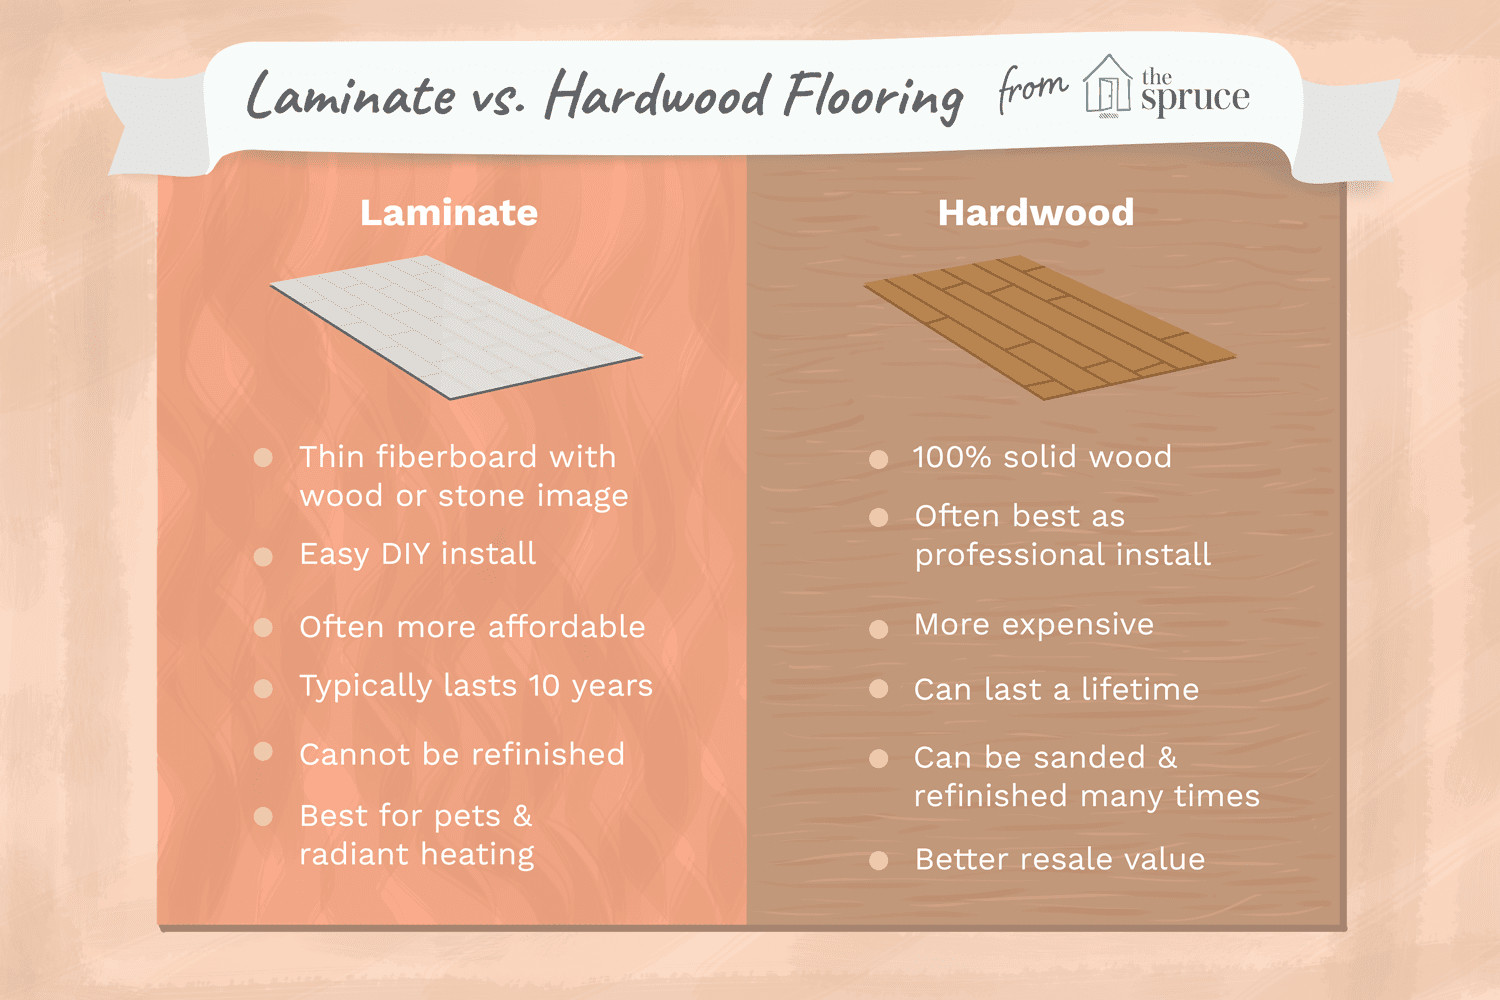 27 Perfect Refinishing Hardwood Floors One Room at A Time 2024 free download refinishing hardwood floors one room at a time of laminate vs hardwood doesnt have to be a hard decision inside hardwood doesnt have to be a hard decision